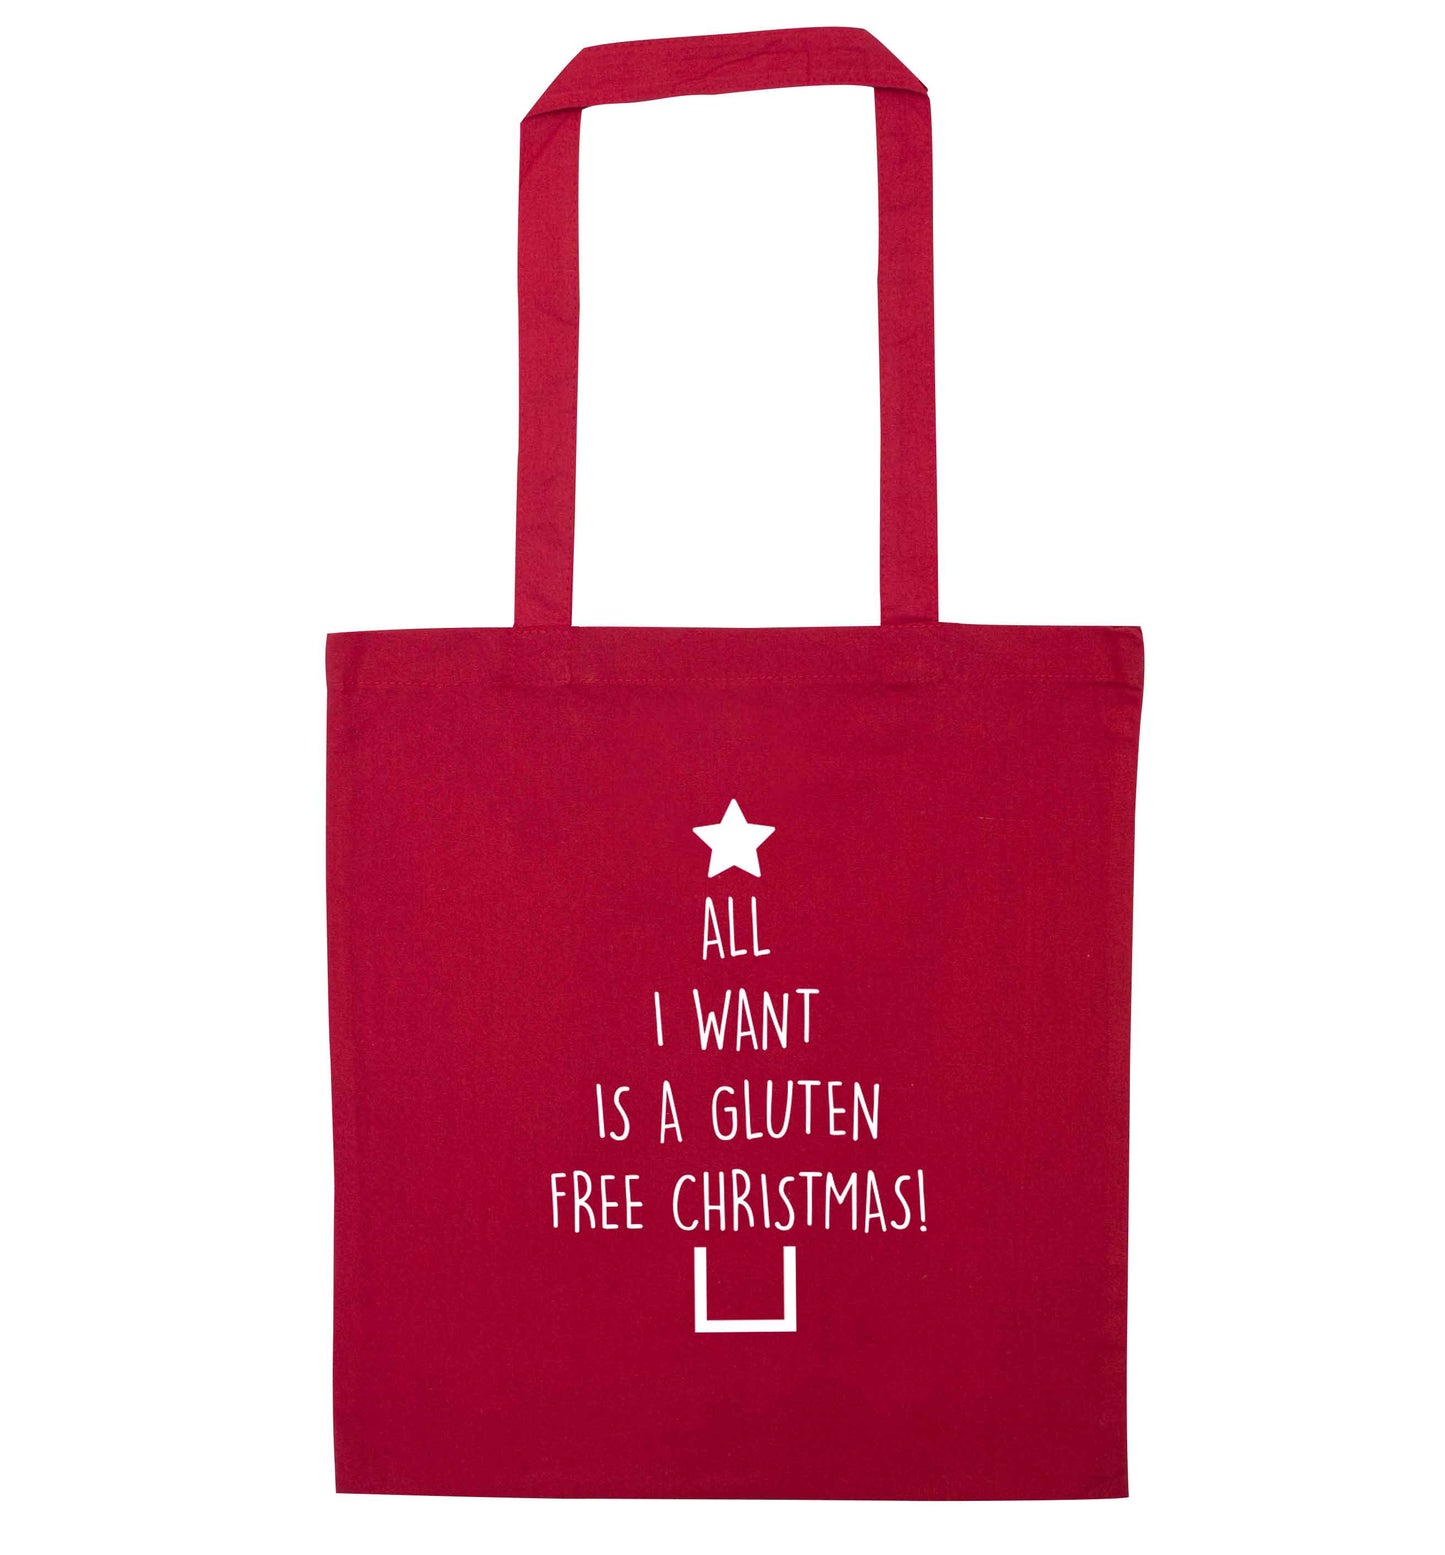 All I want is a gluten free Christmas red tote bag